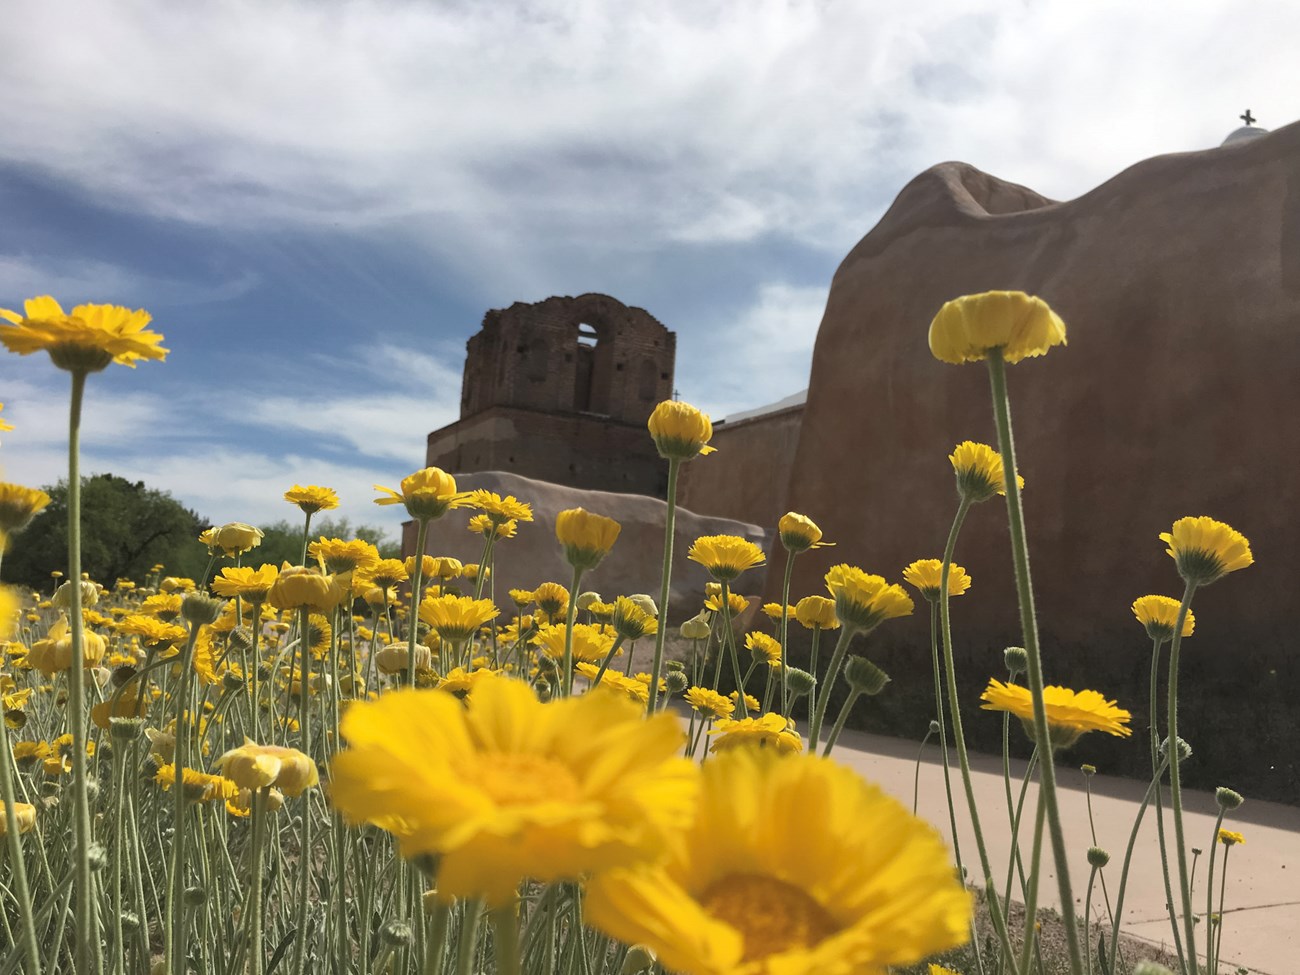 Photograph looking up at flowers with adobe church in the background.